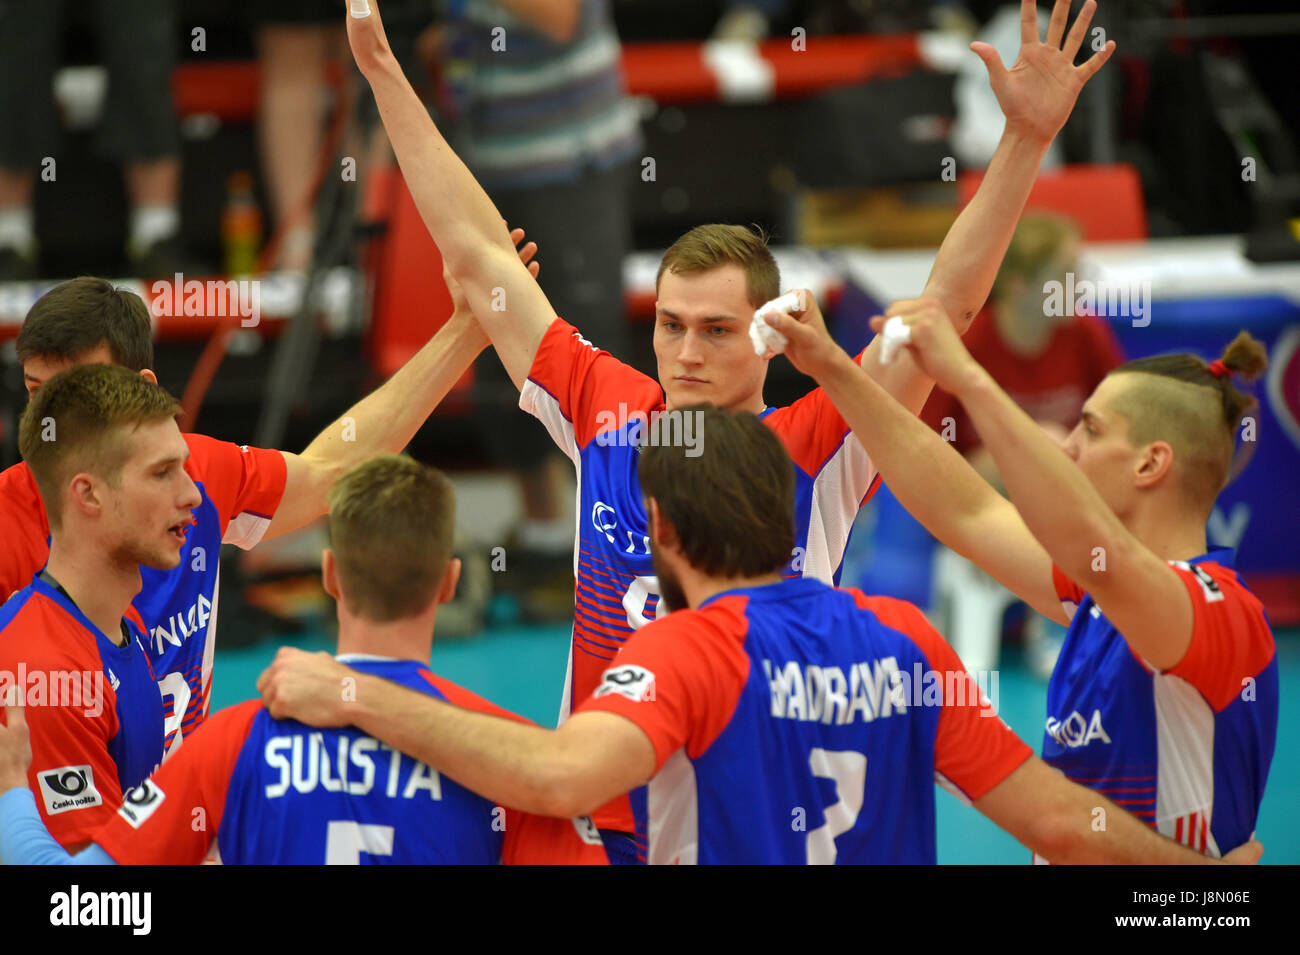 Czech team celebrate victory in the volleyball World Cup Qualification match Czech Republic vs Cyprus in Karlovy Vary, Czech Republic, May 27, 2017. (CTK Photo/Slavomir Kubes) Stock Photo